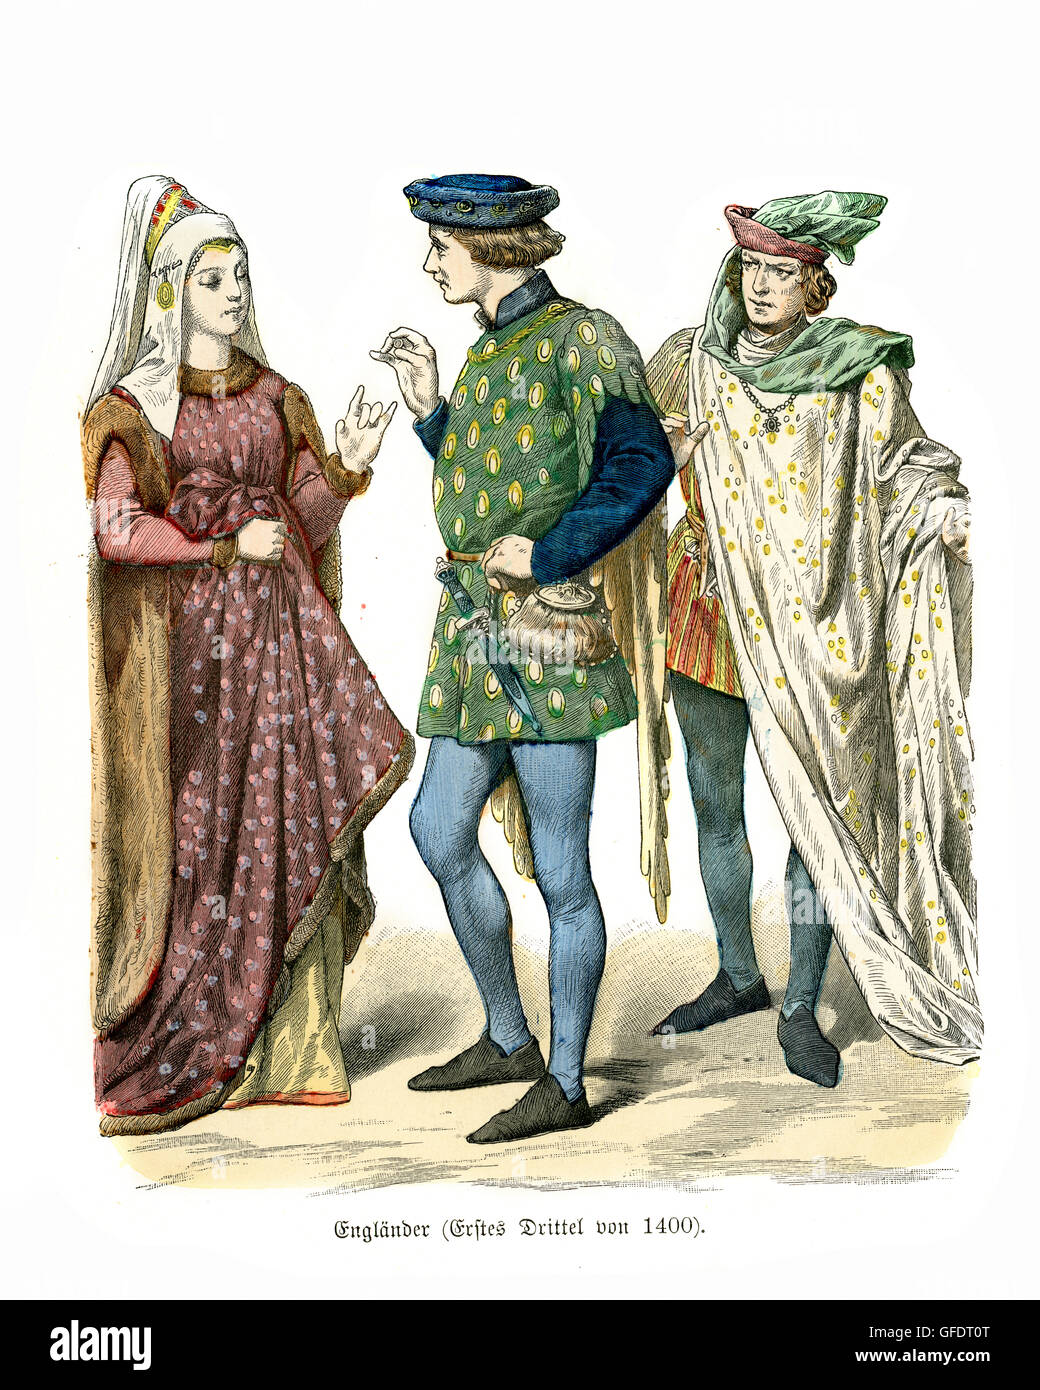 Mens and womens fashions of Medieval England at the start of the 15th Century Stock Photo